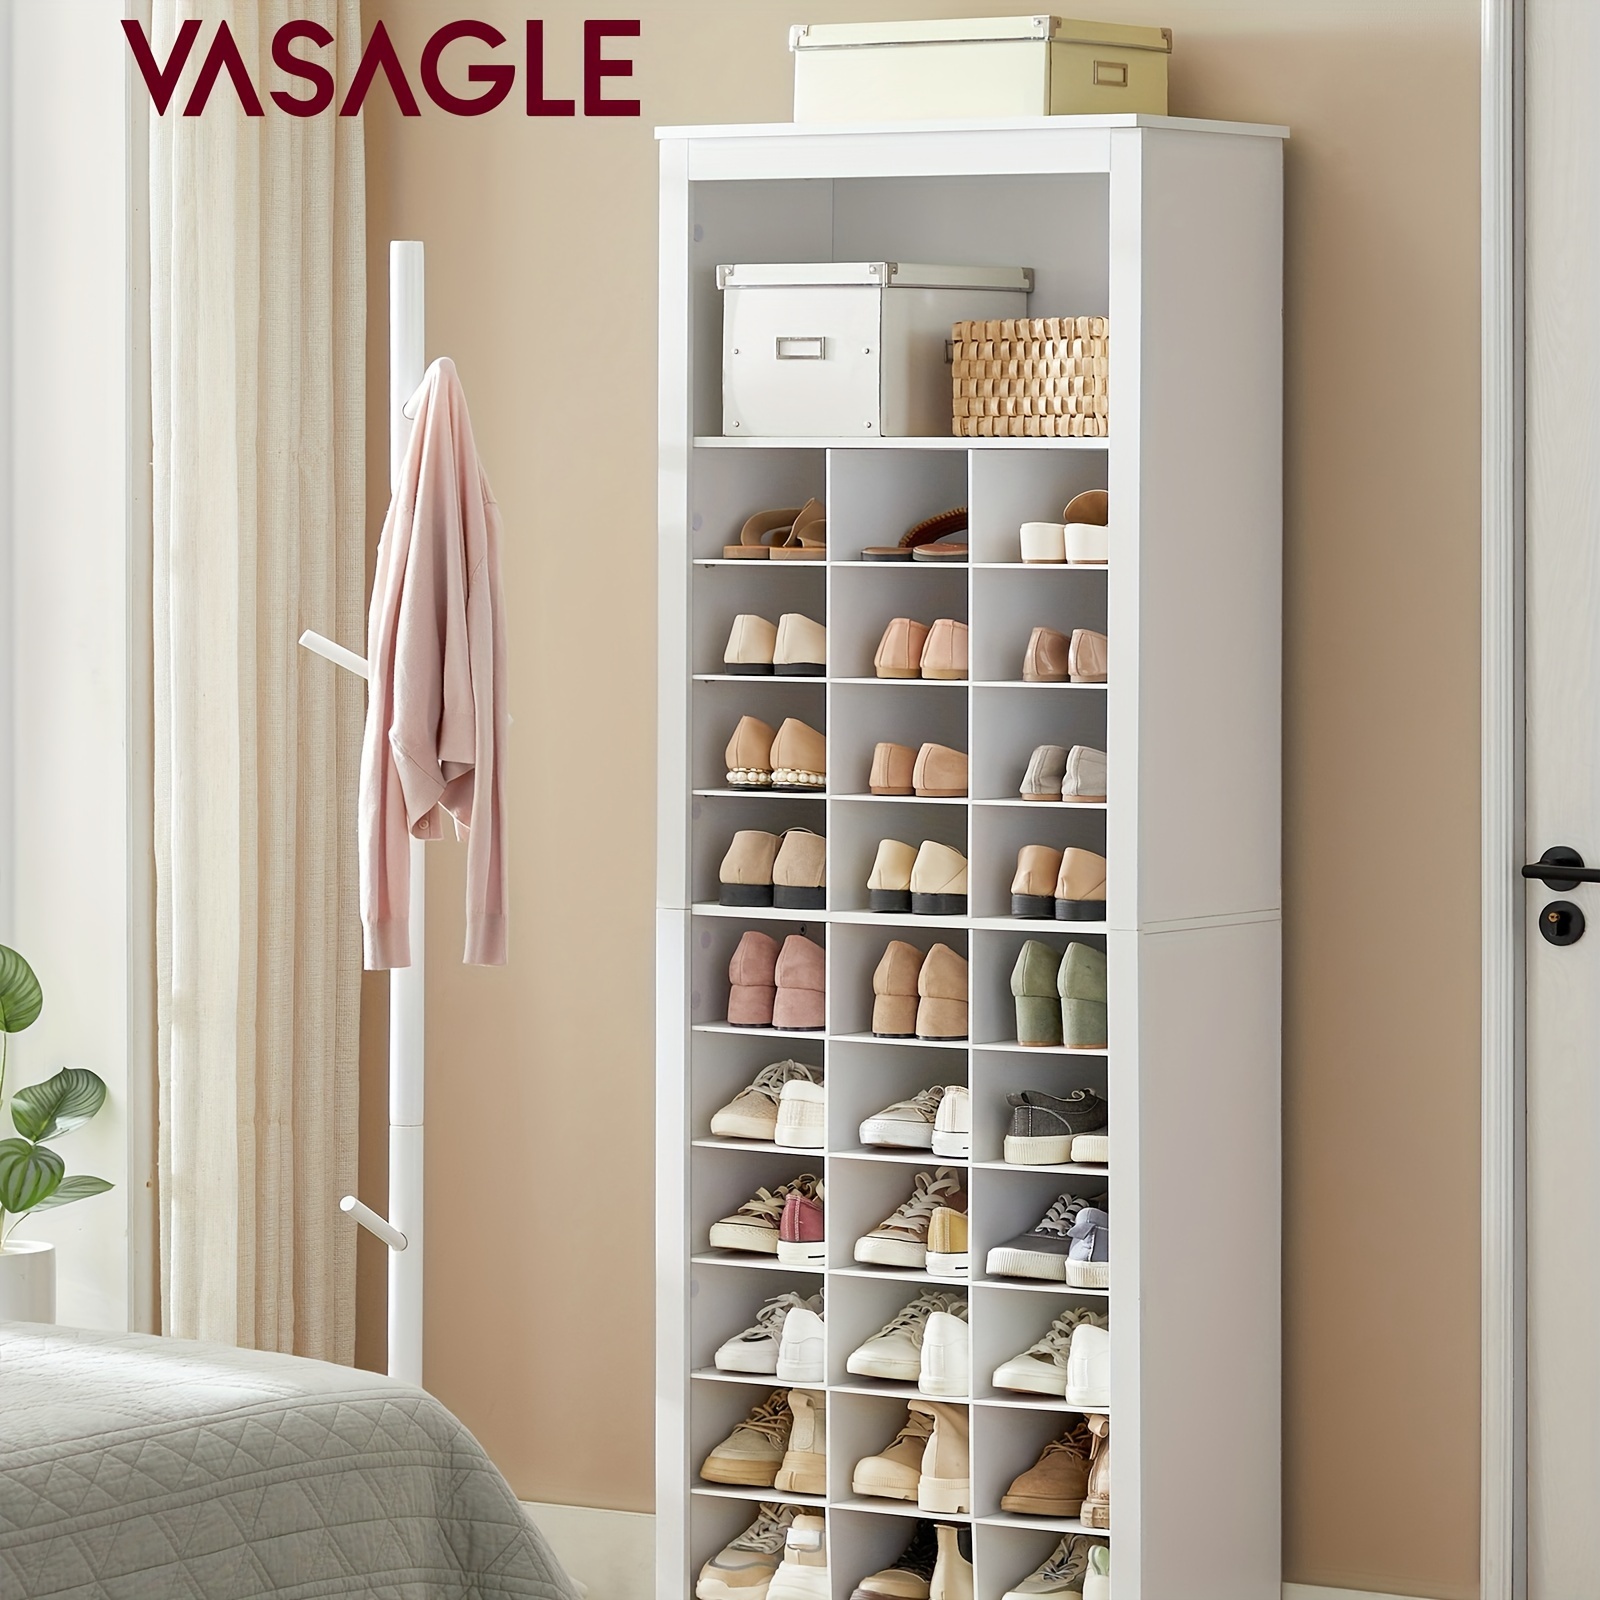 

1pc Vasagle 10-tier Shoe Storage Cabinet - Holds Up To 30 Pairs Of Shoes - Entryway Bedroom Organizer - 12.6 X 24.8 X 73.6 Inches